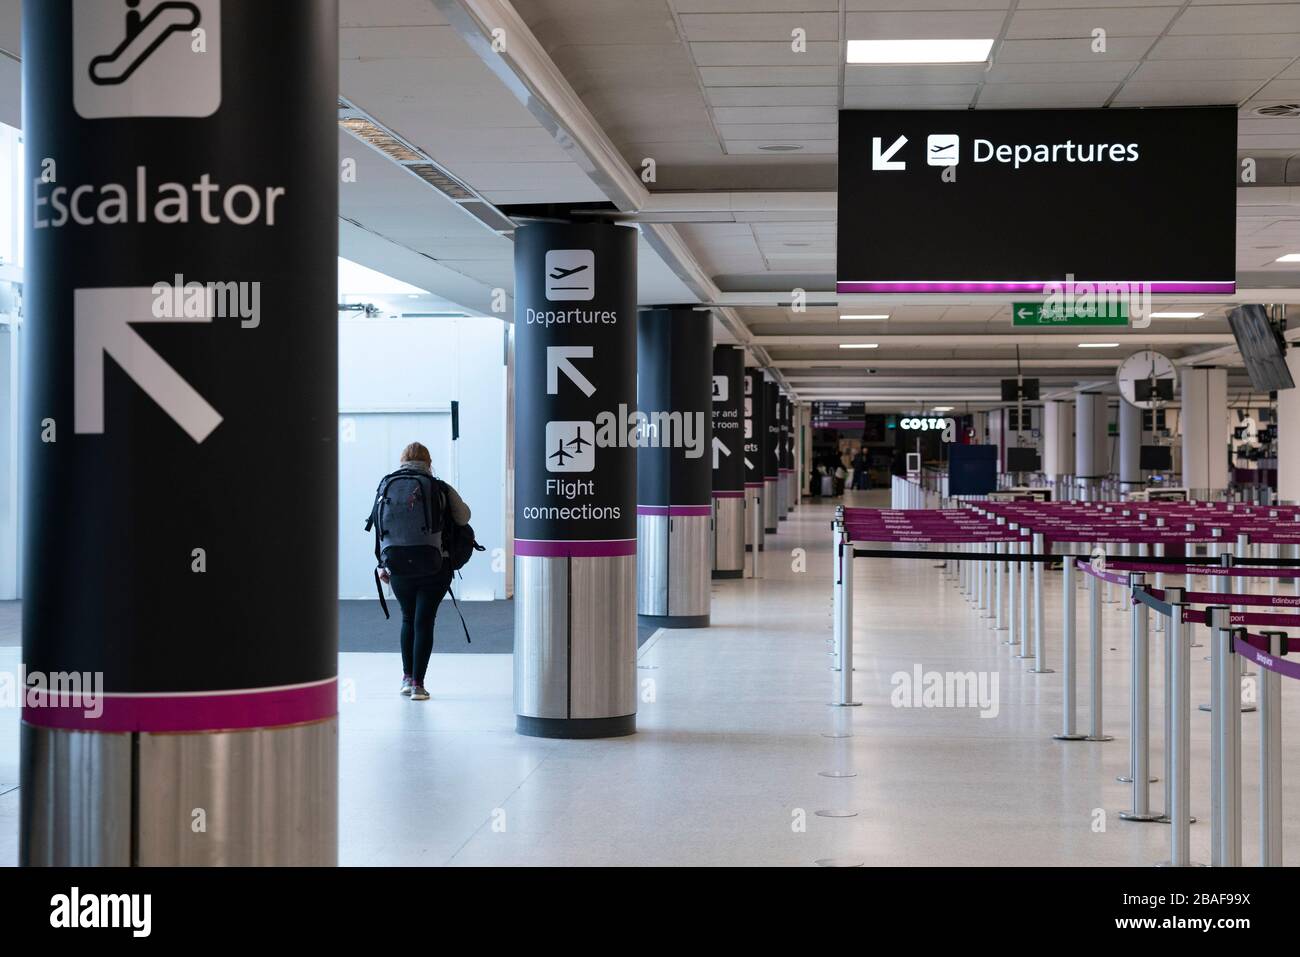 Edinburgh, Scotland, UK. 27 March, 2020. Interior views of a deserted Edinburgh Airport during the coronavirus pandemic. With very few flights during the current Covid-19 crisis passengers are scarce in the terminal building. Iain Masterton/Alamy Live News Stock Photo